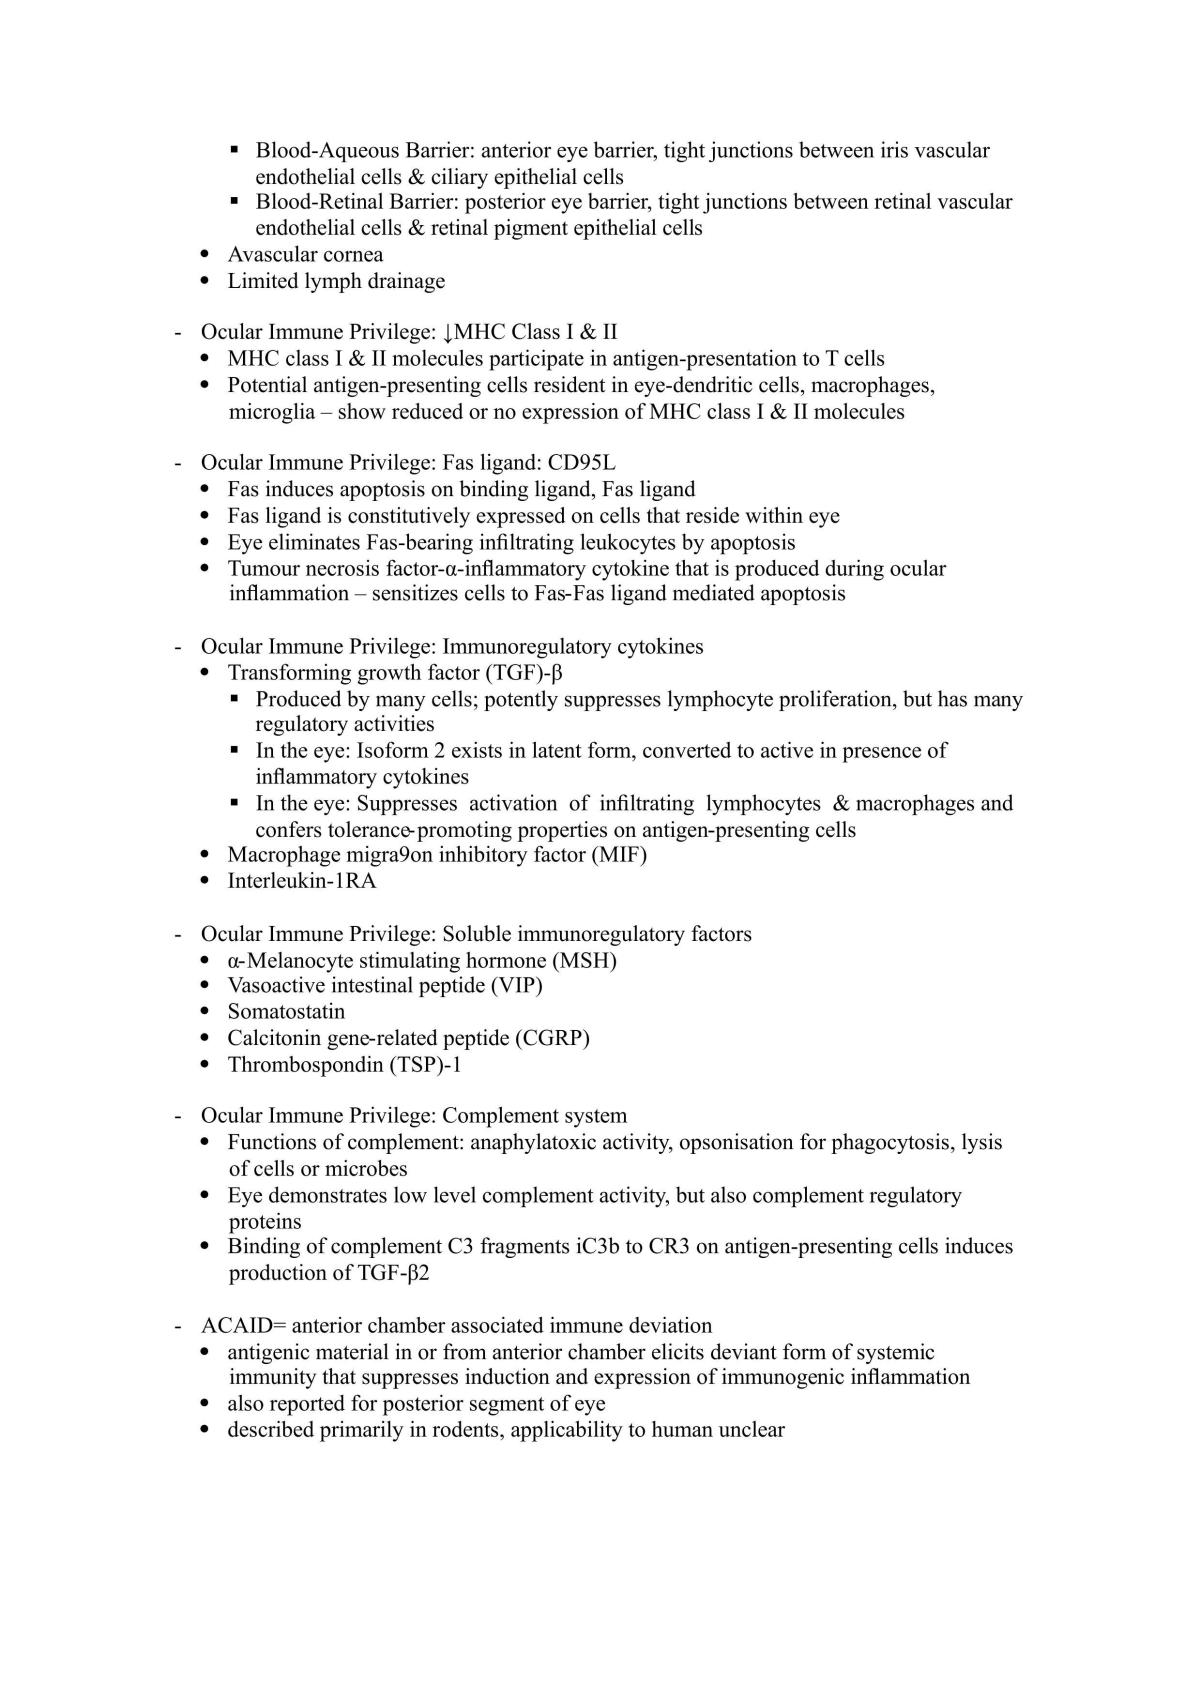 Human Immunology and Infectious Diseases Lecture Notes - Page 50